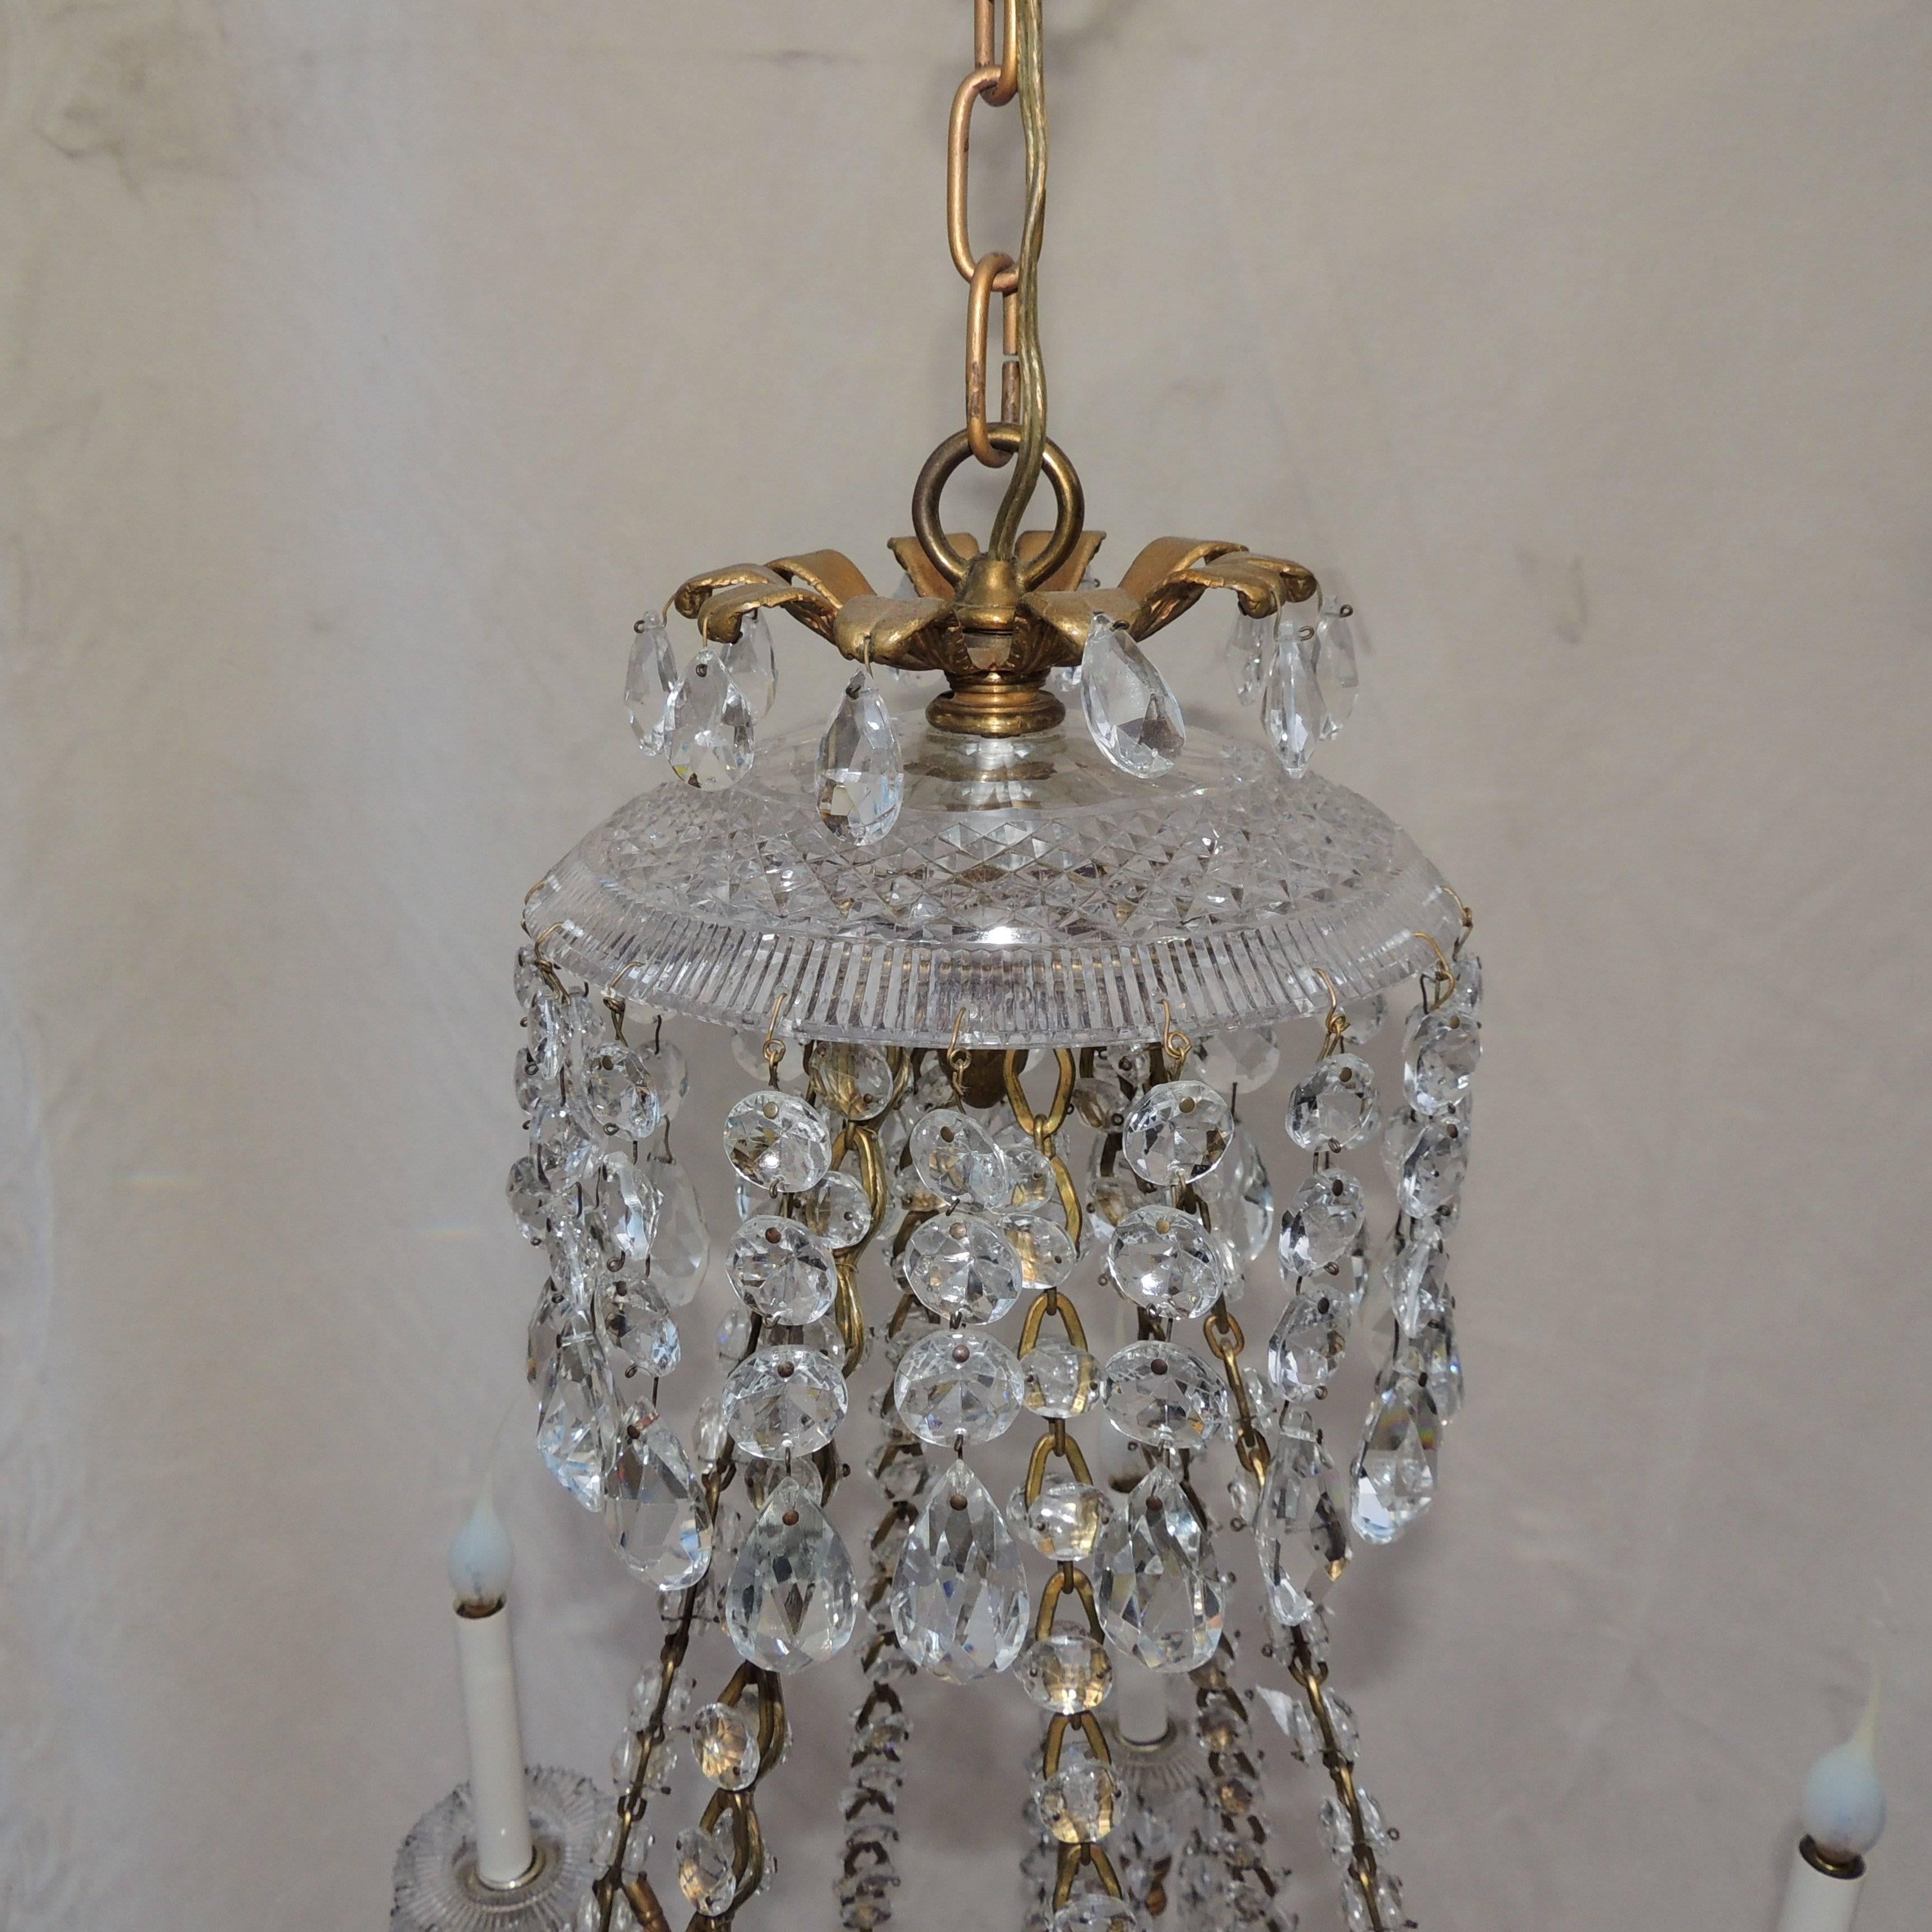 Faceted Fine French Doré Bronze Cut Crystal Bowl Neoclassical Empire Chandelier Fixture